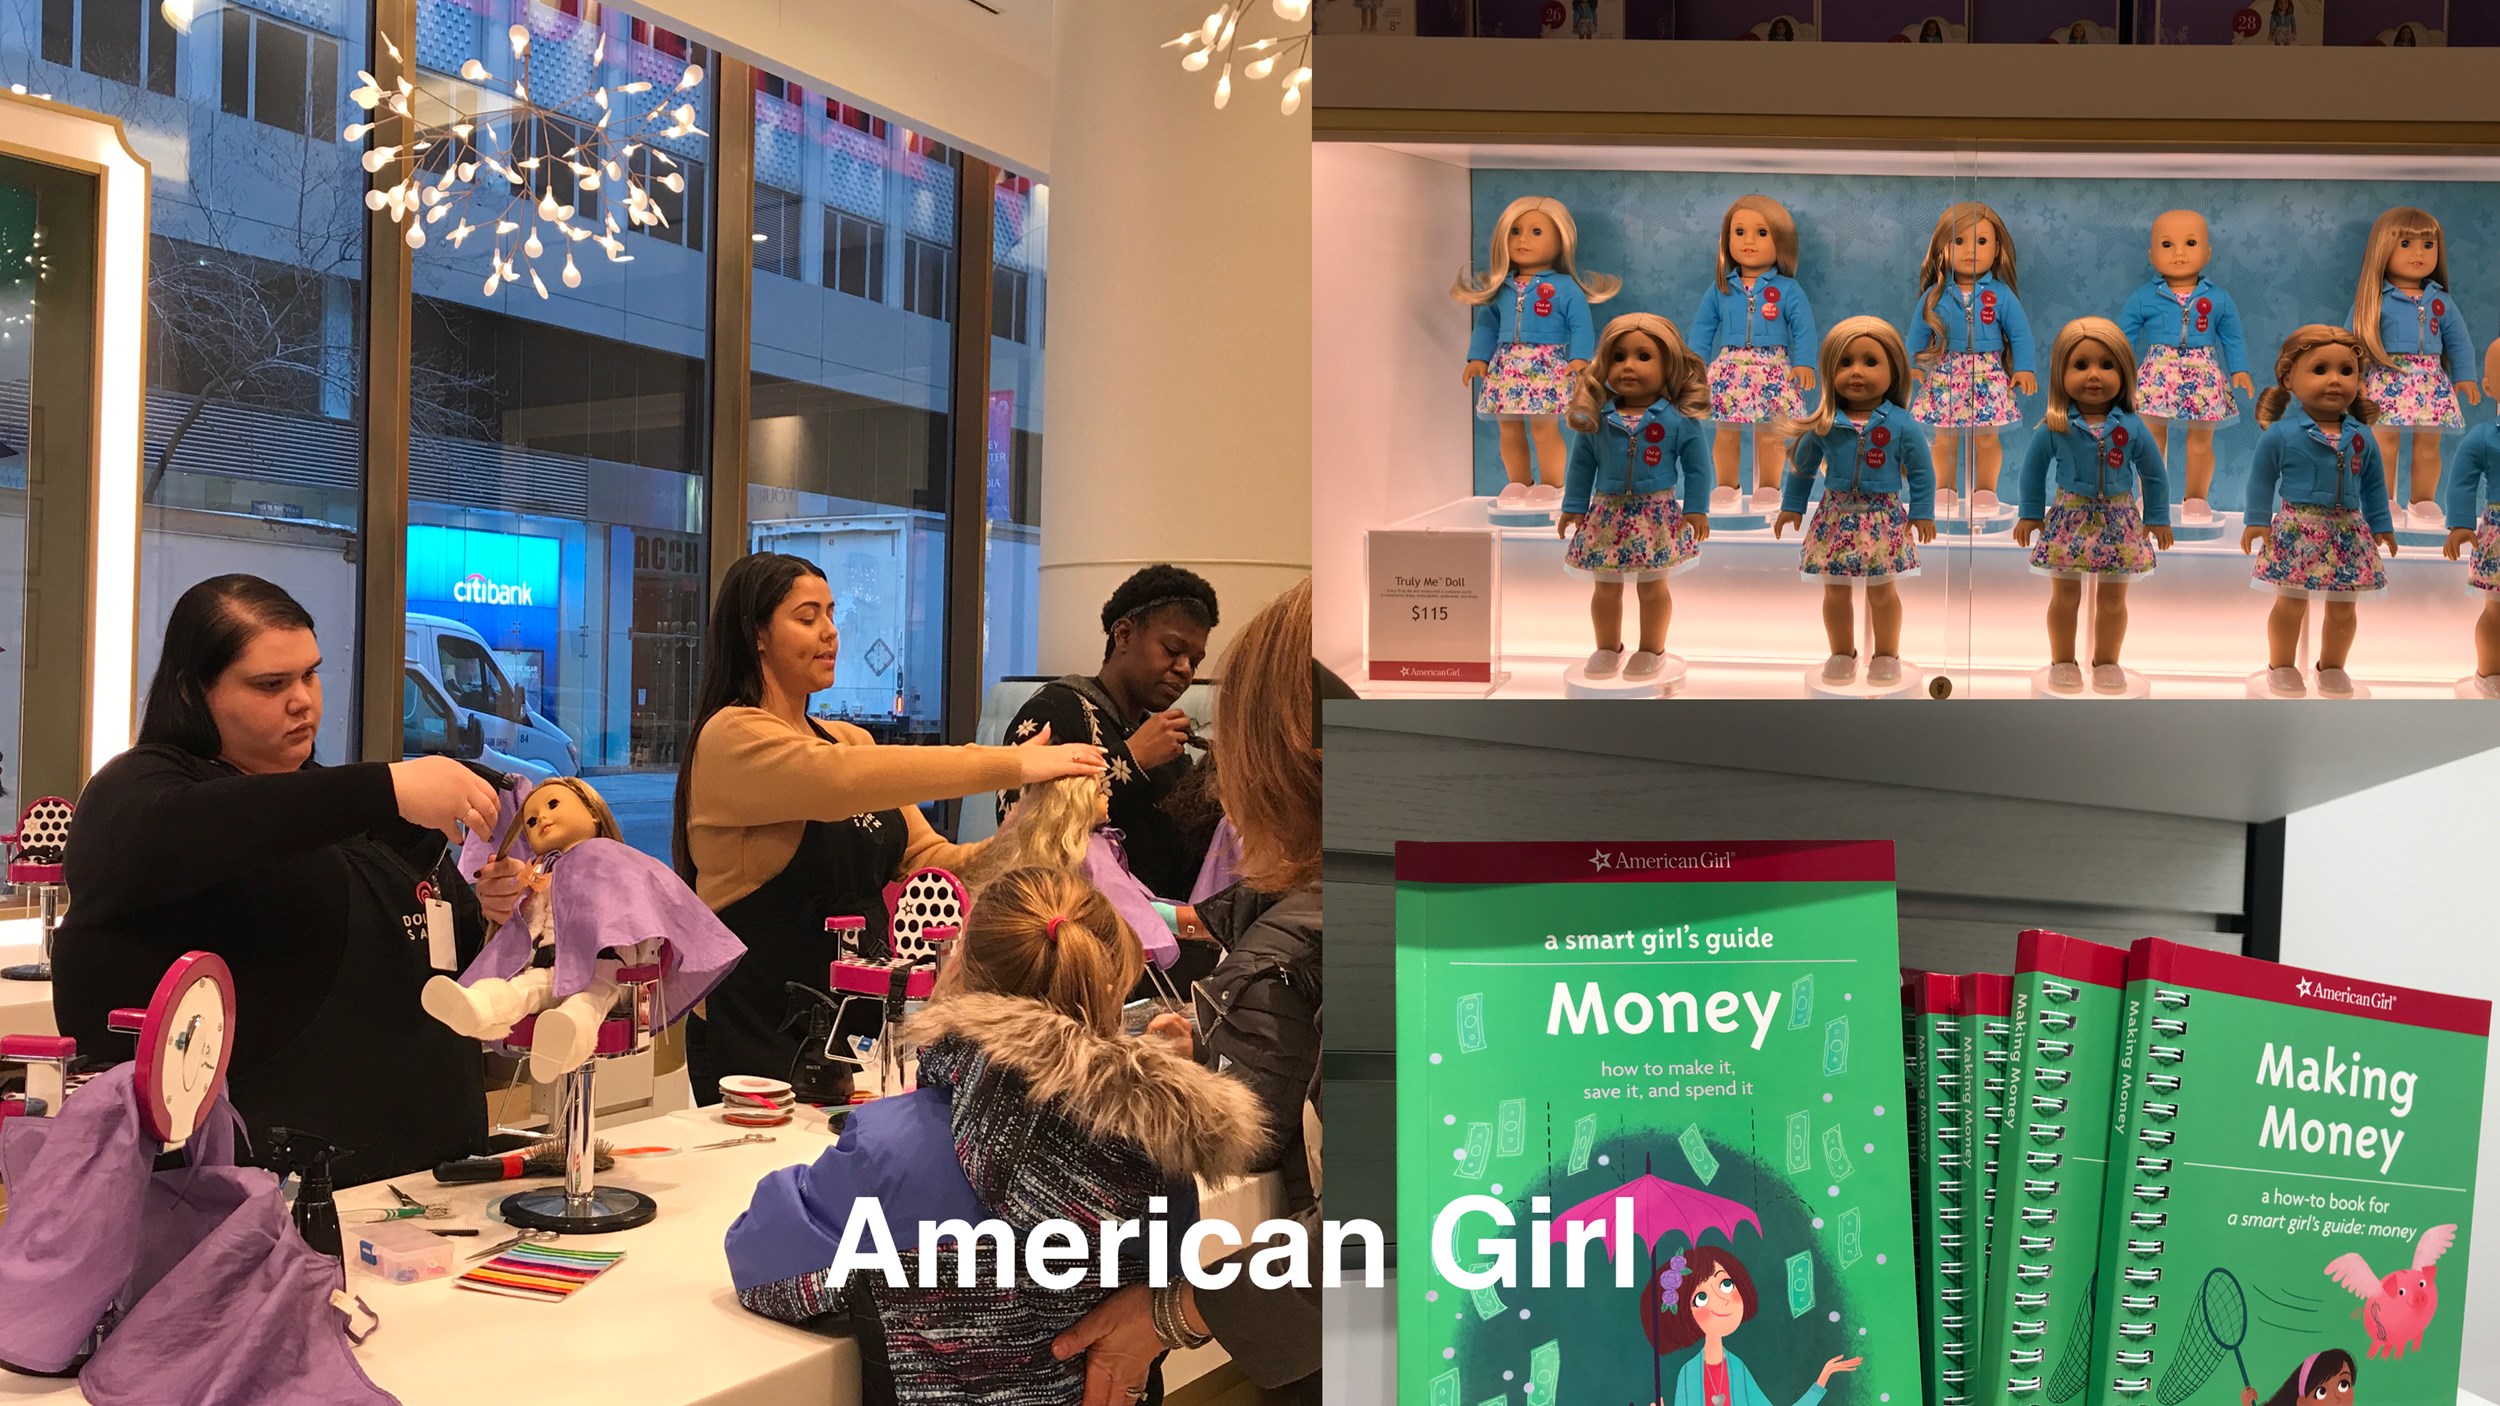 American Girl concept store